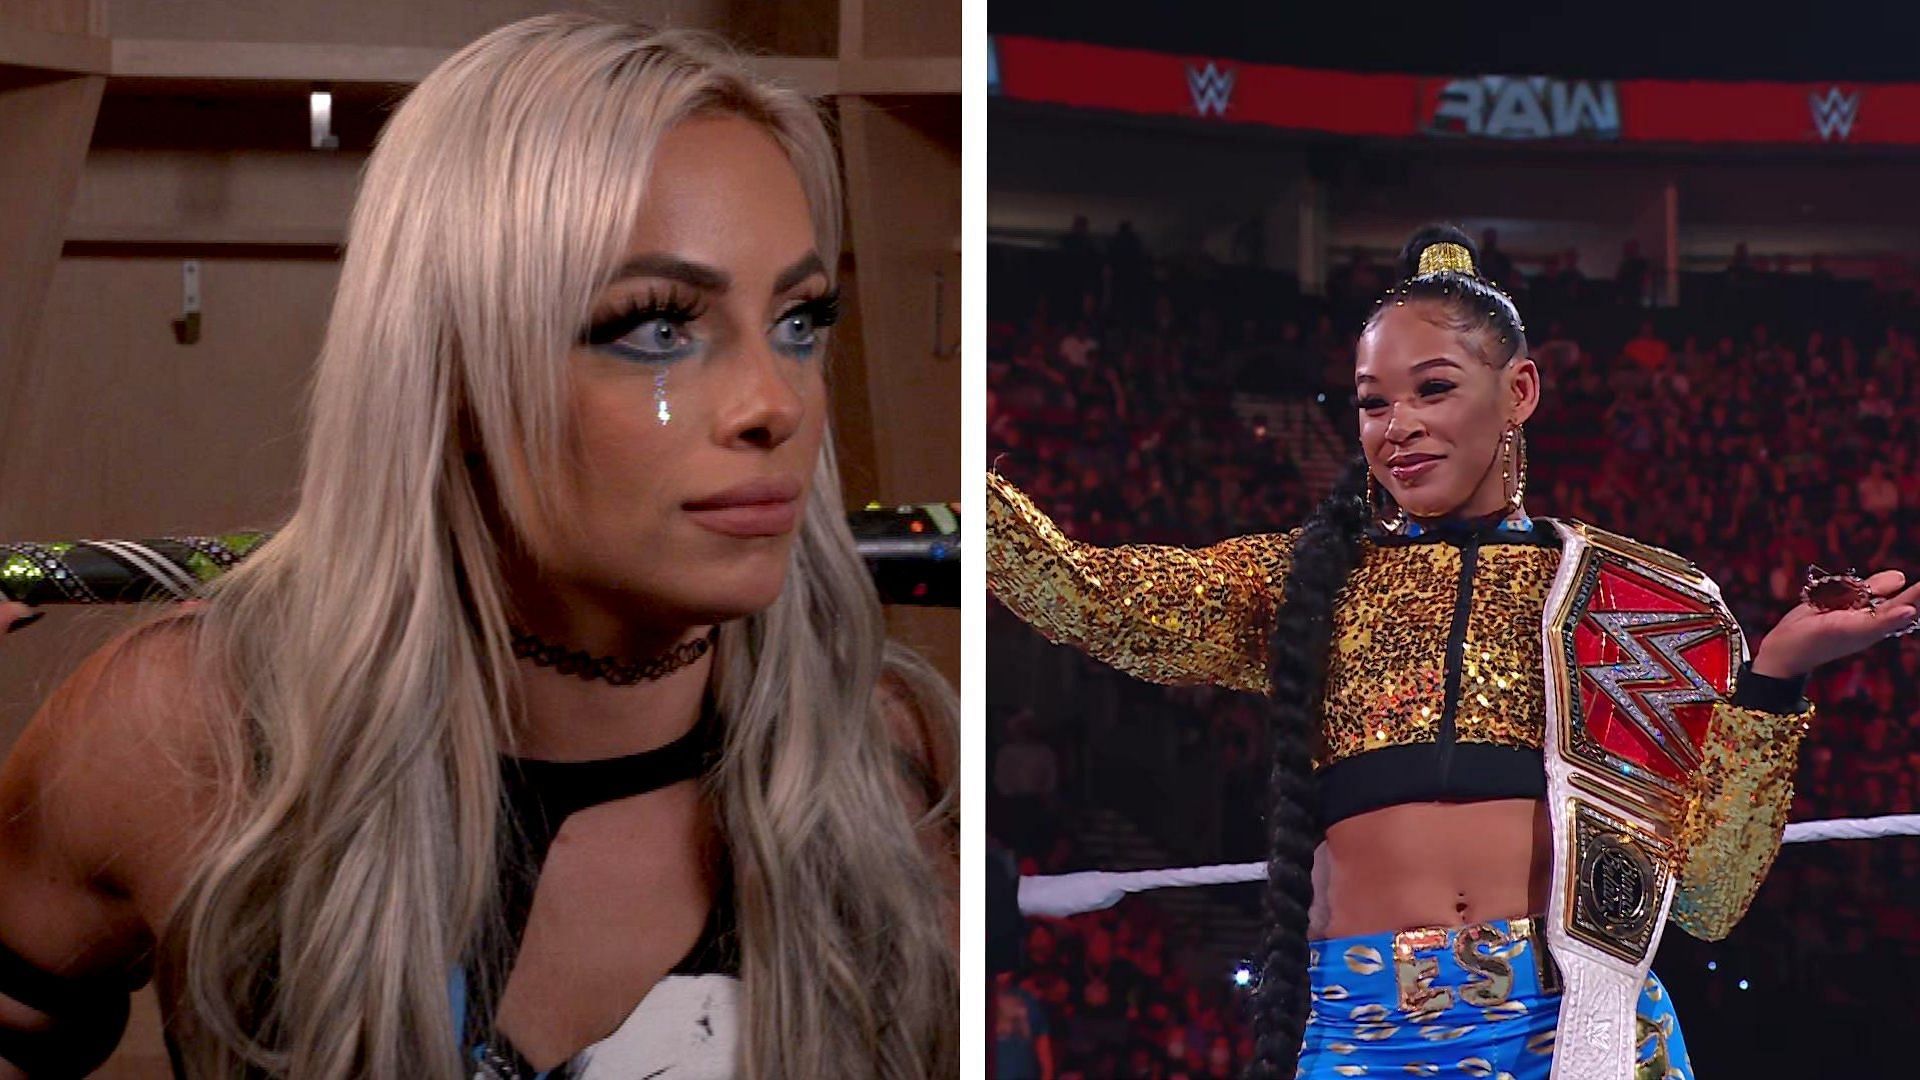 Liv Morgan could have a big 2023 in WWE